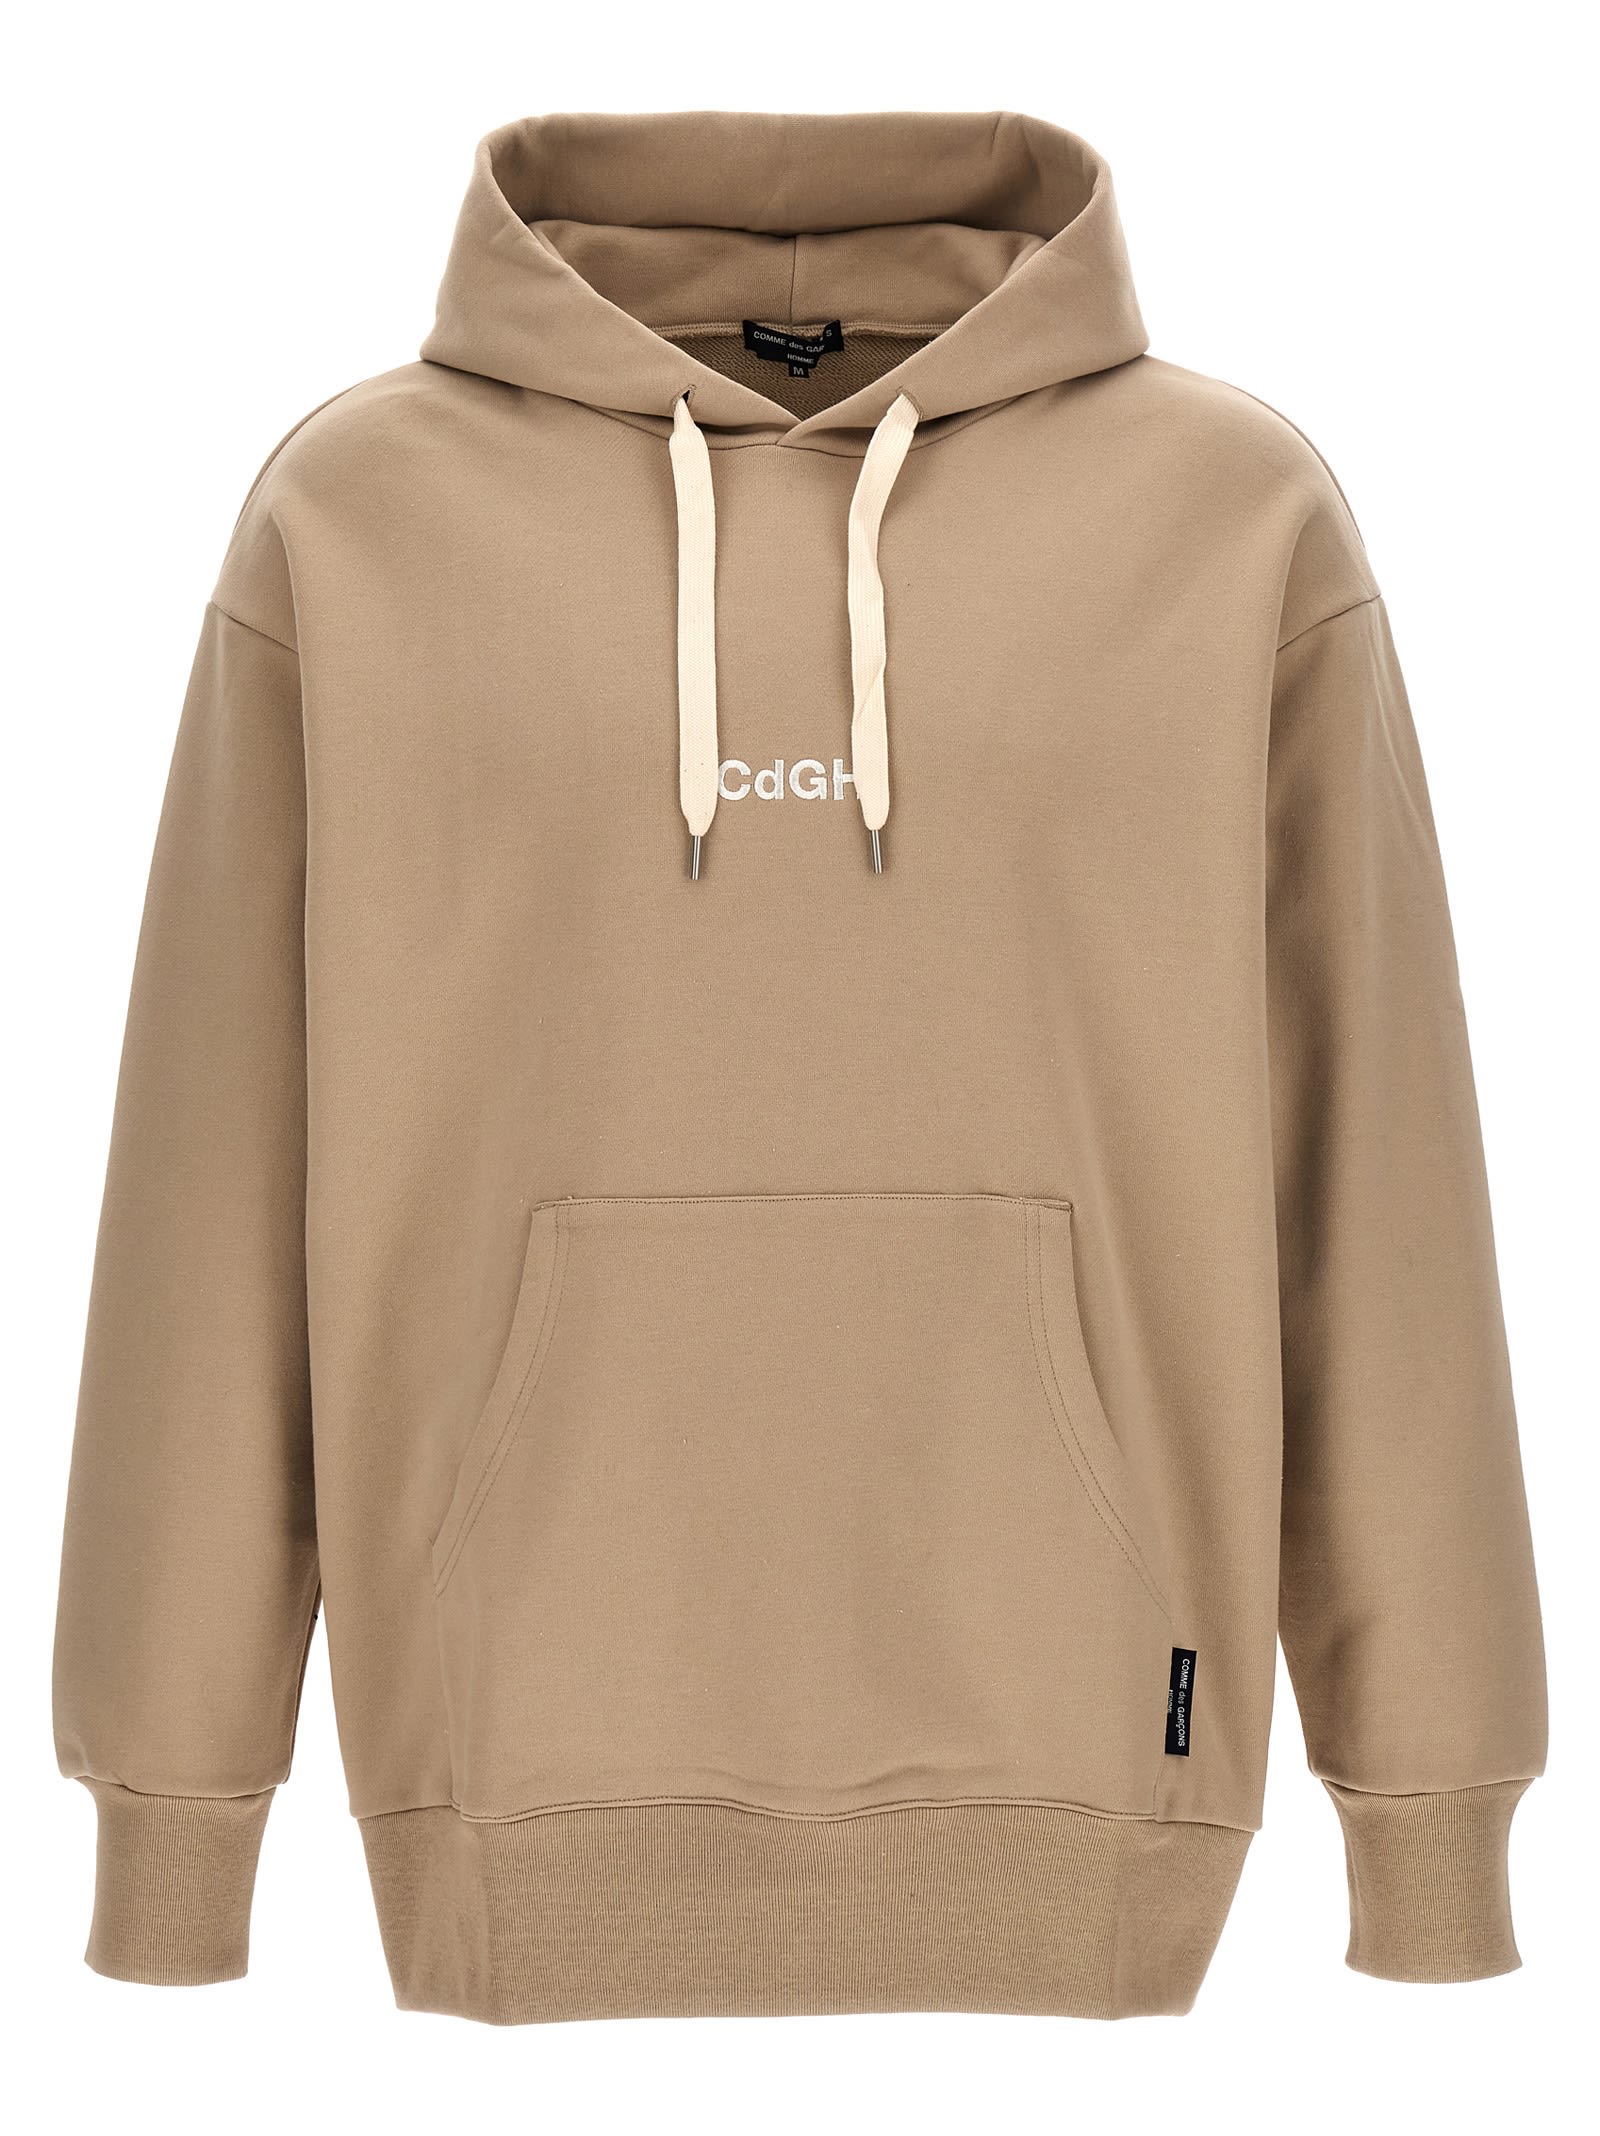 Logo Embroidery Hoodie